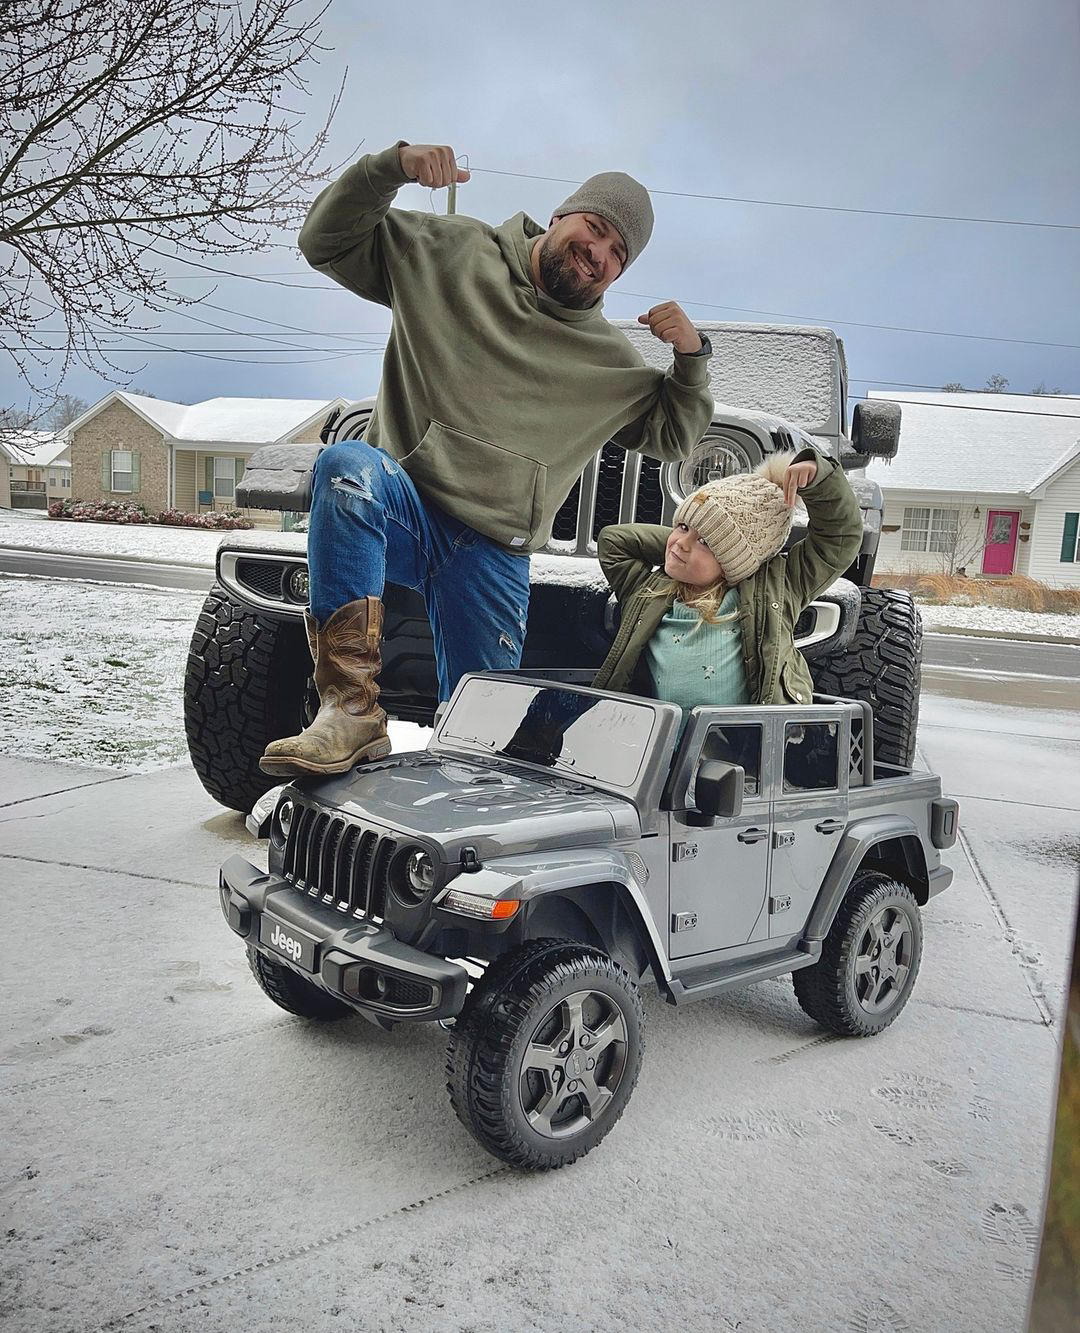 #JeepLove in every size